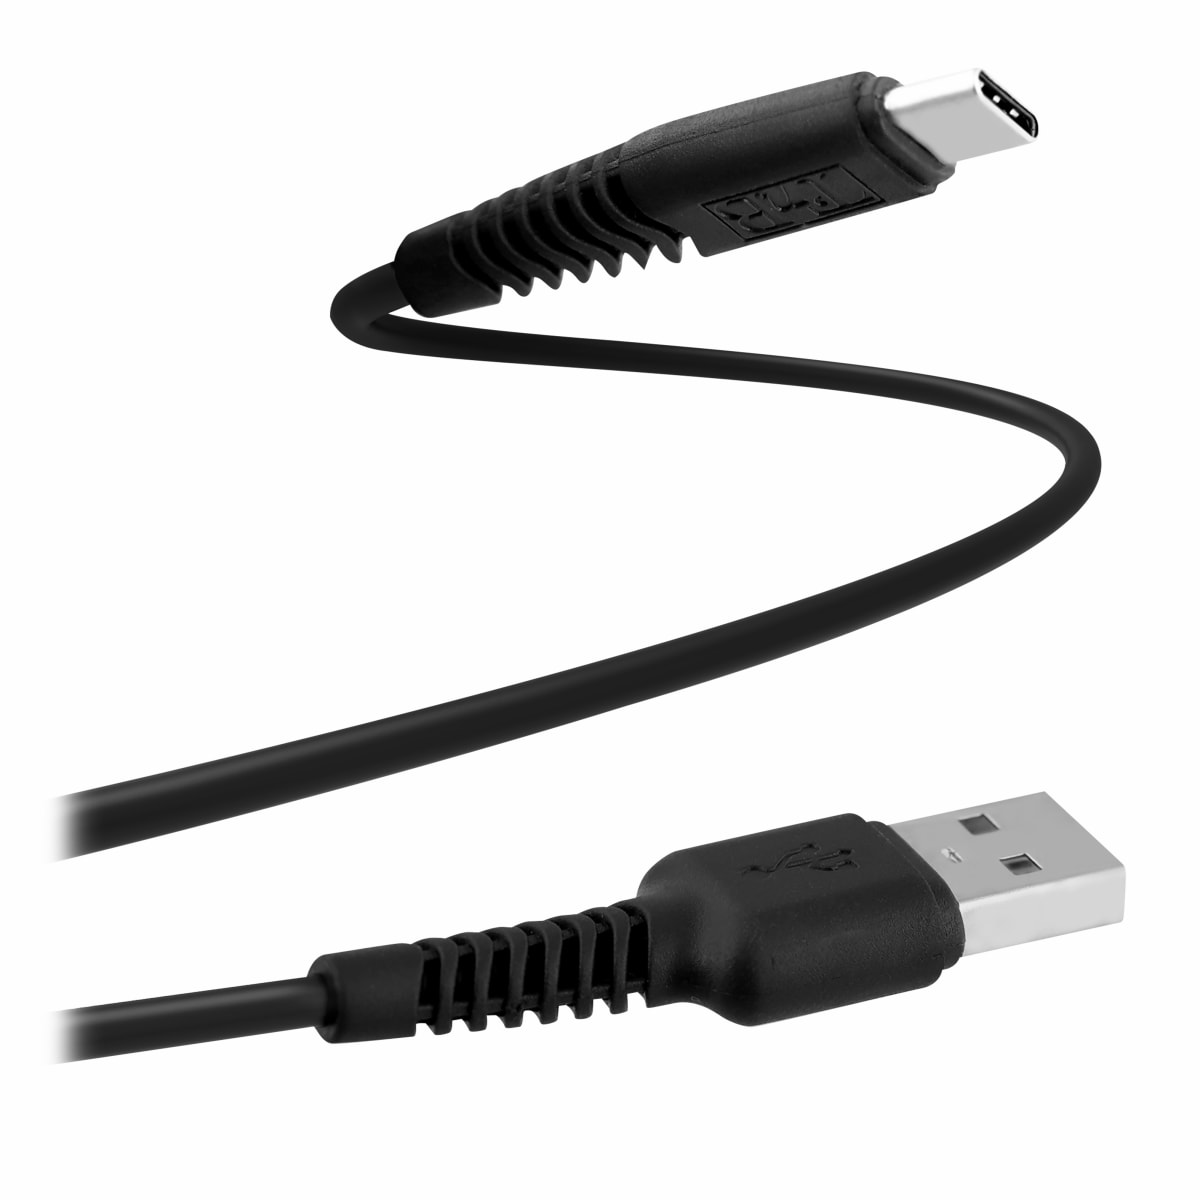 USB-C cable with reinforced connectors